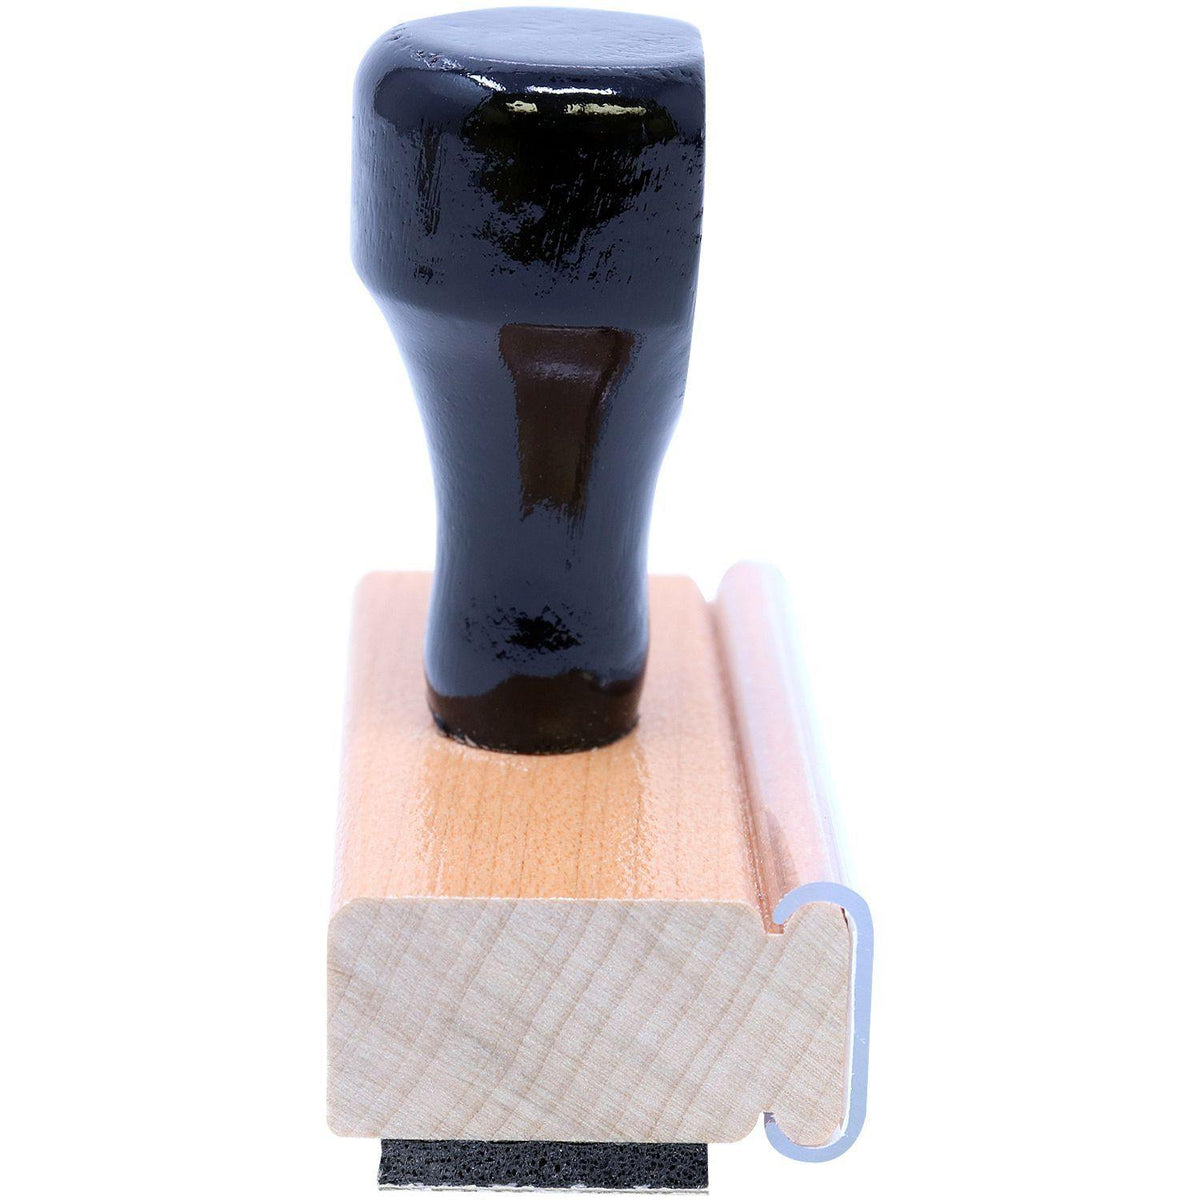 Side View of Large Fax Stamp Rubber Stamp Alt 1